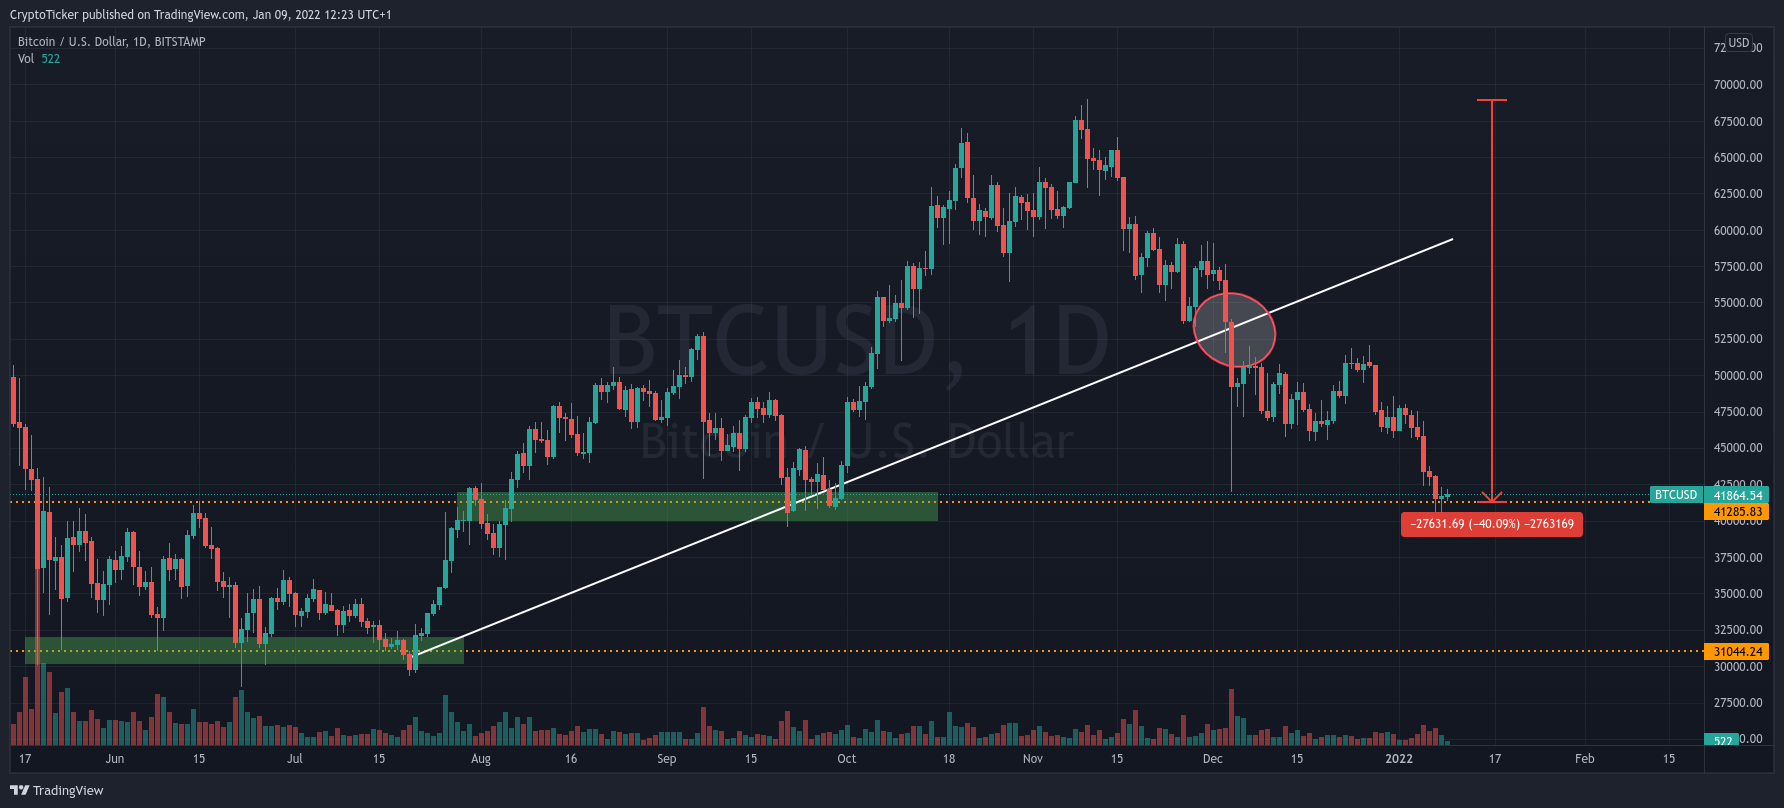 BTC/USD 1-day chart showing a break in the uptrend